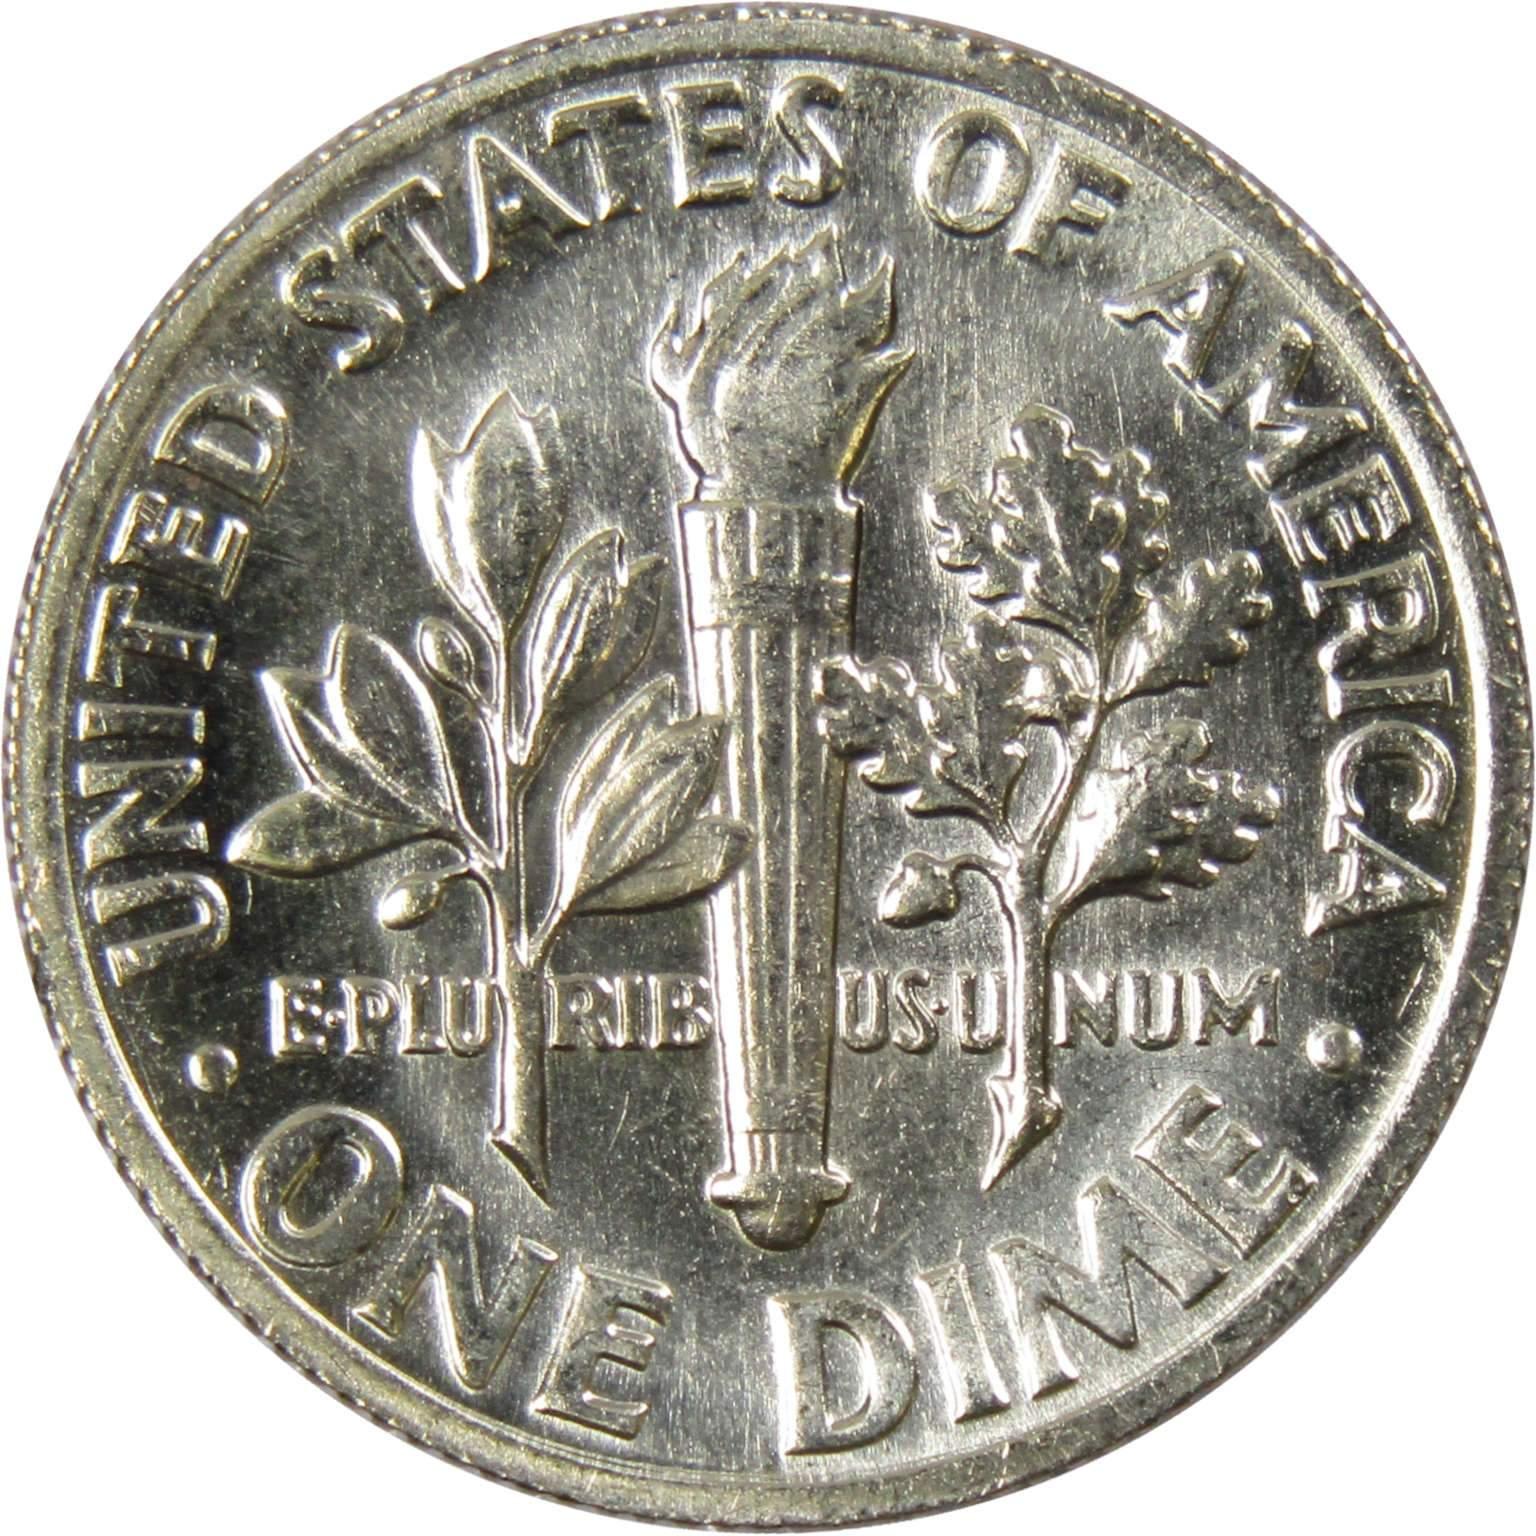 1972 Roosevelt Dime BU Uncirculated Mint State 10c US Coin Collectible